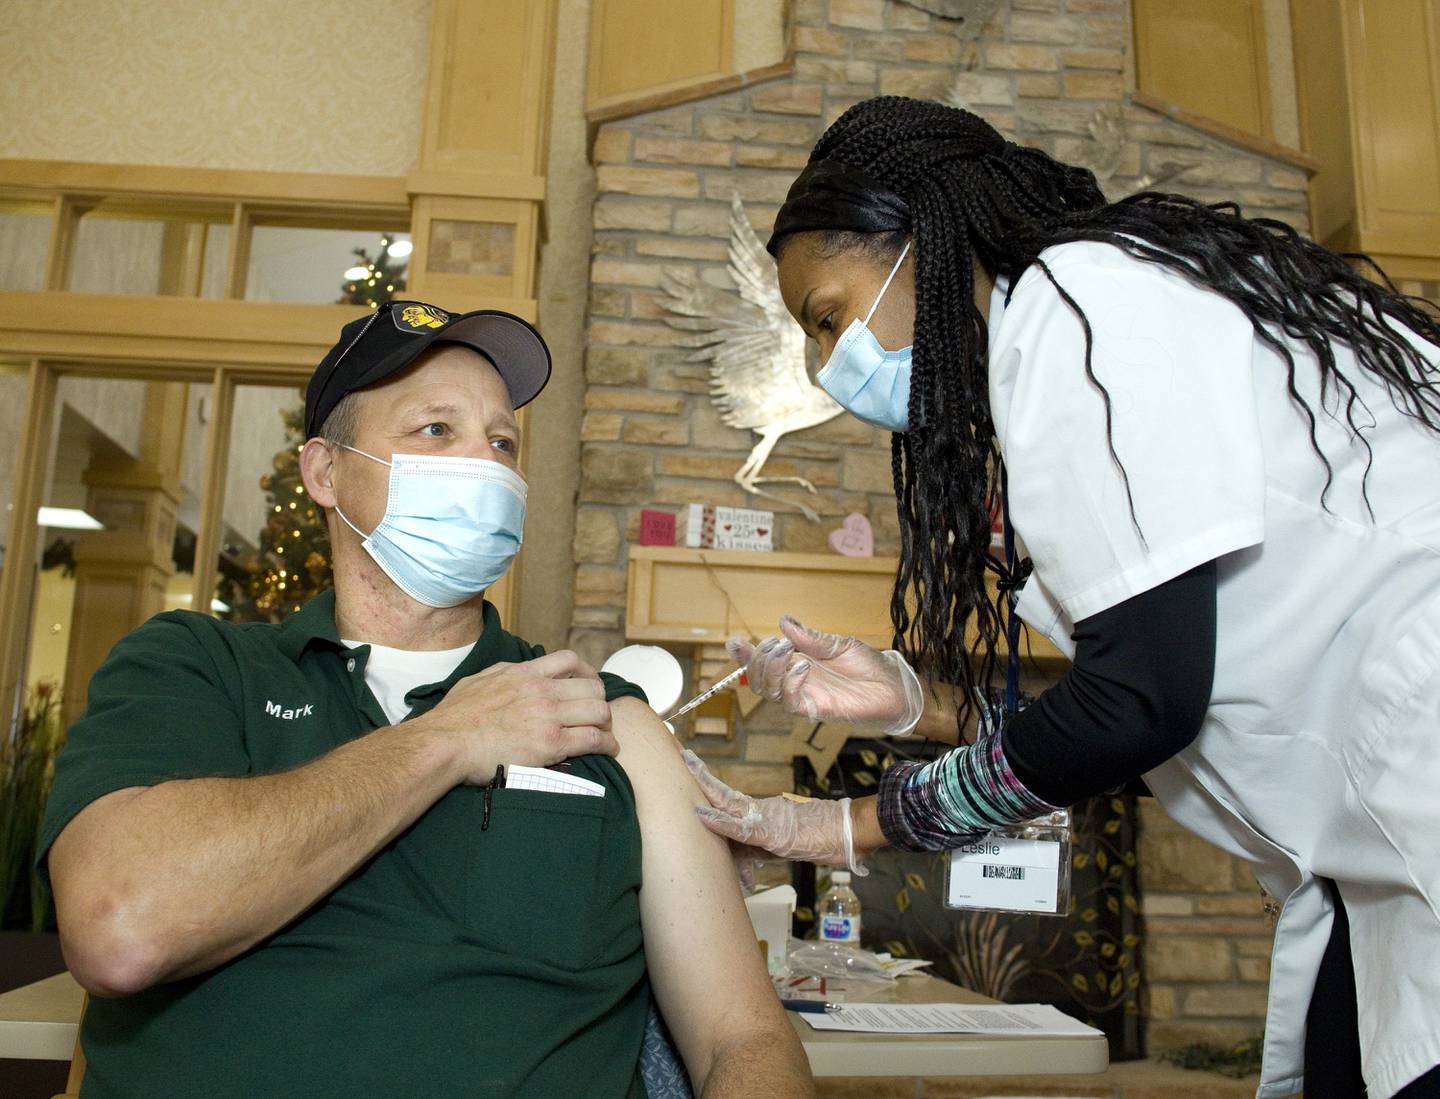 Timbers of Shorewood employee Mark Zvokel receives the COVID-19 vaccine from Walgreens Pharmacists Leslie Jones-Hunter at Timbers of Shorewood on January 7, 2021, in Shorewood, Ill.